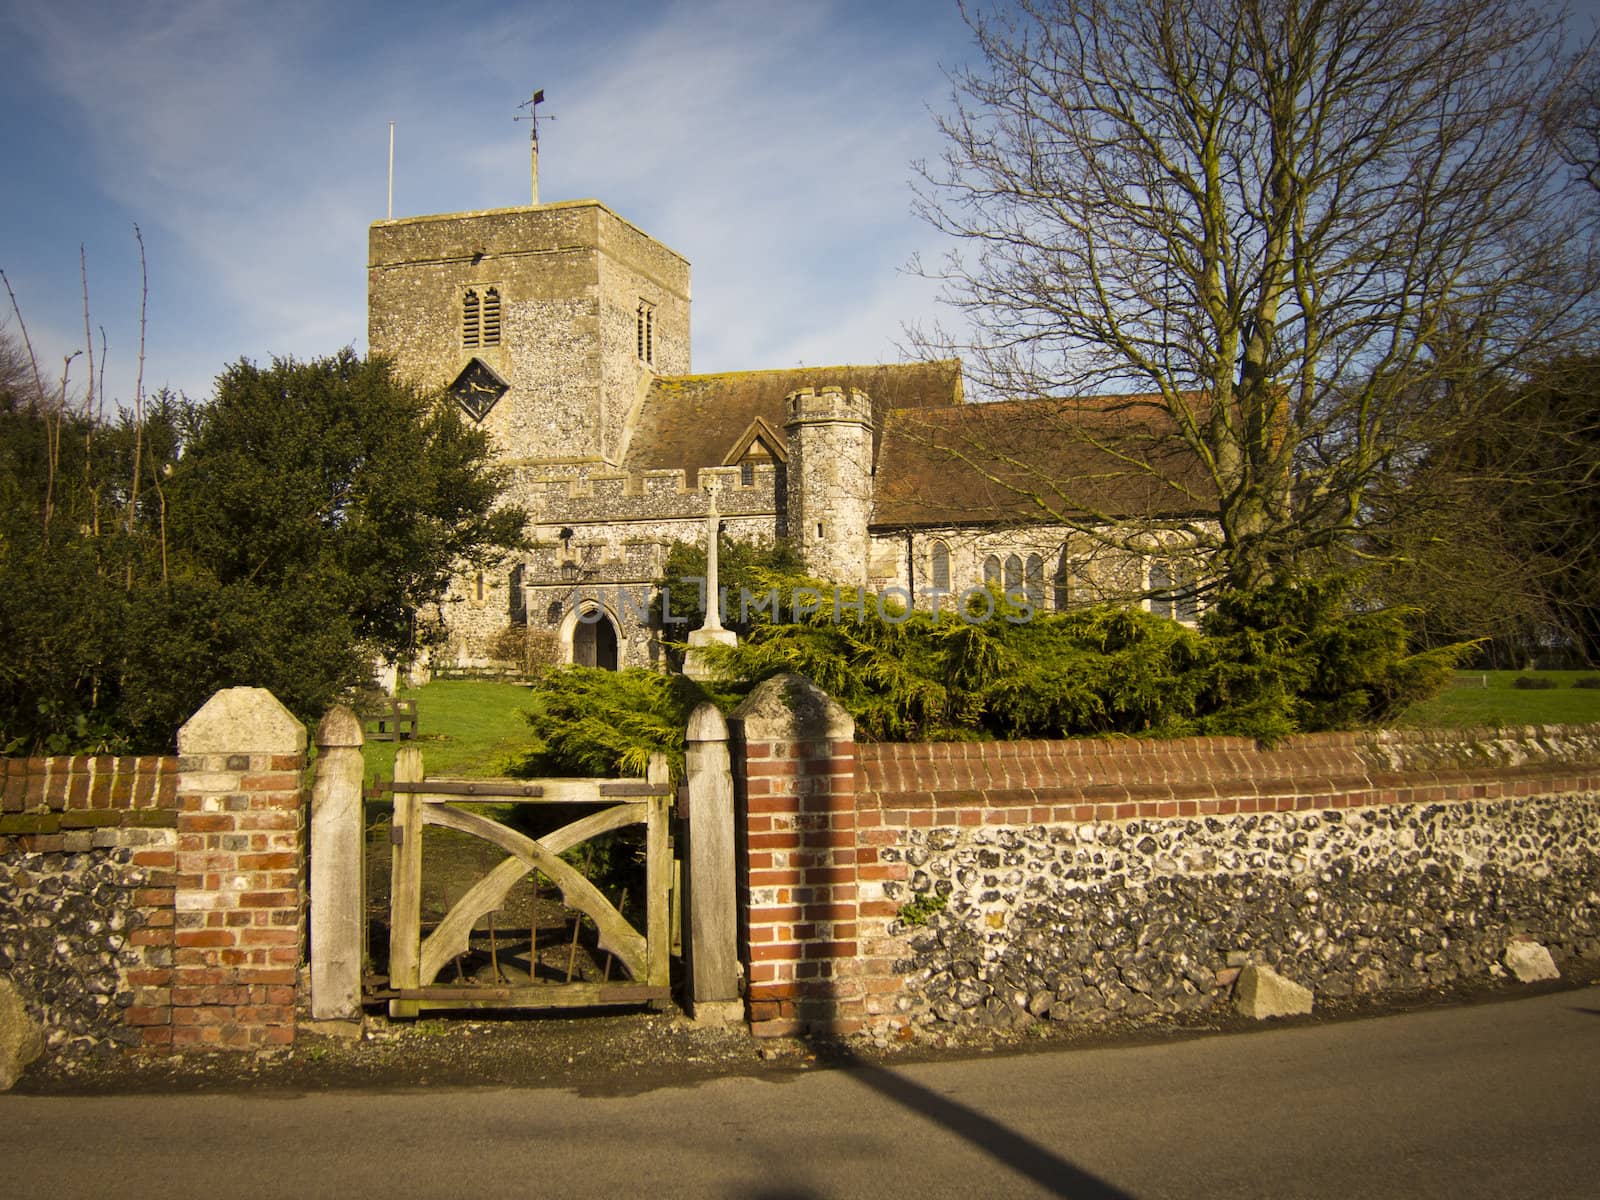 St Peter and St Paul church in the village of Borden, Kent